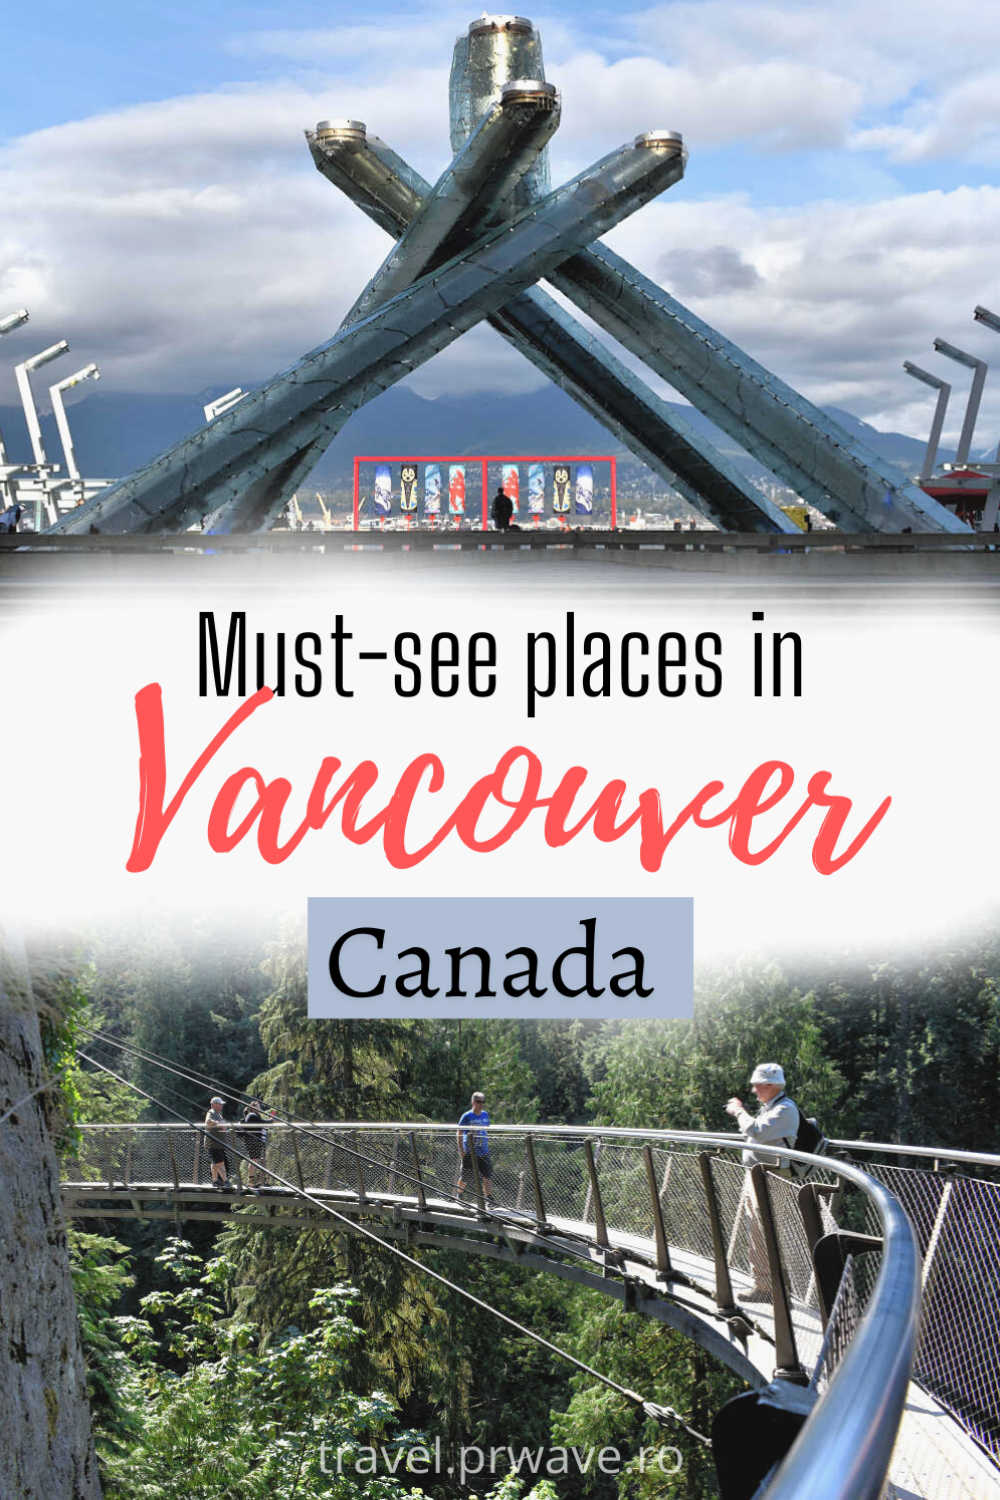 Vancouver attractions. Discover the best places to visit in Vancouver and the best Vancouver things to do from this guide to visiting Vancouver by a local. #vancouver #canada #vancouverthingstodo #northamerica #traveldestinations #vancouverguide